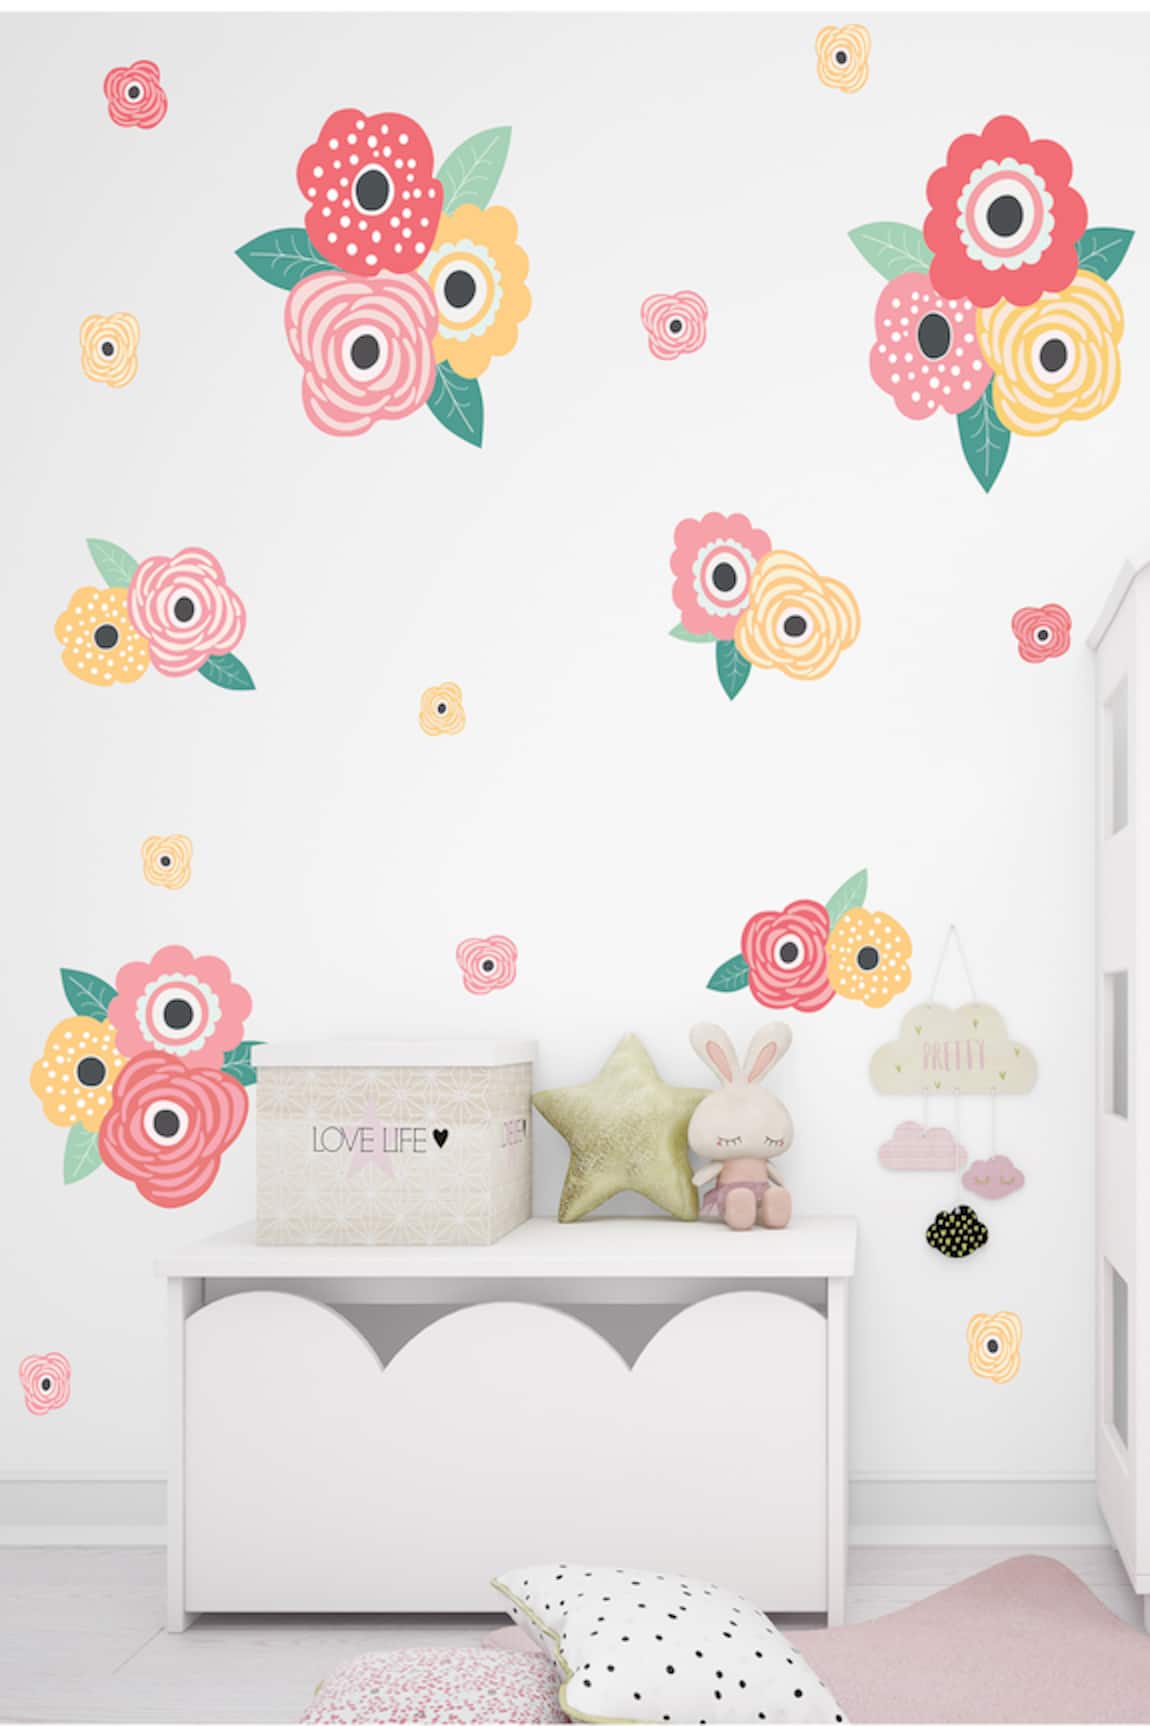 My Kids Wall Blooming Flowers Wall Stickers 26 Pcs Set